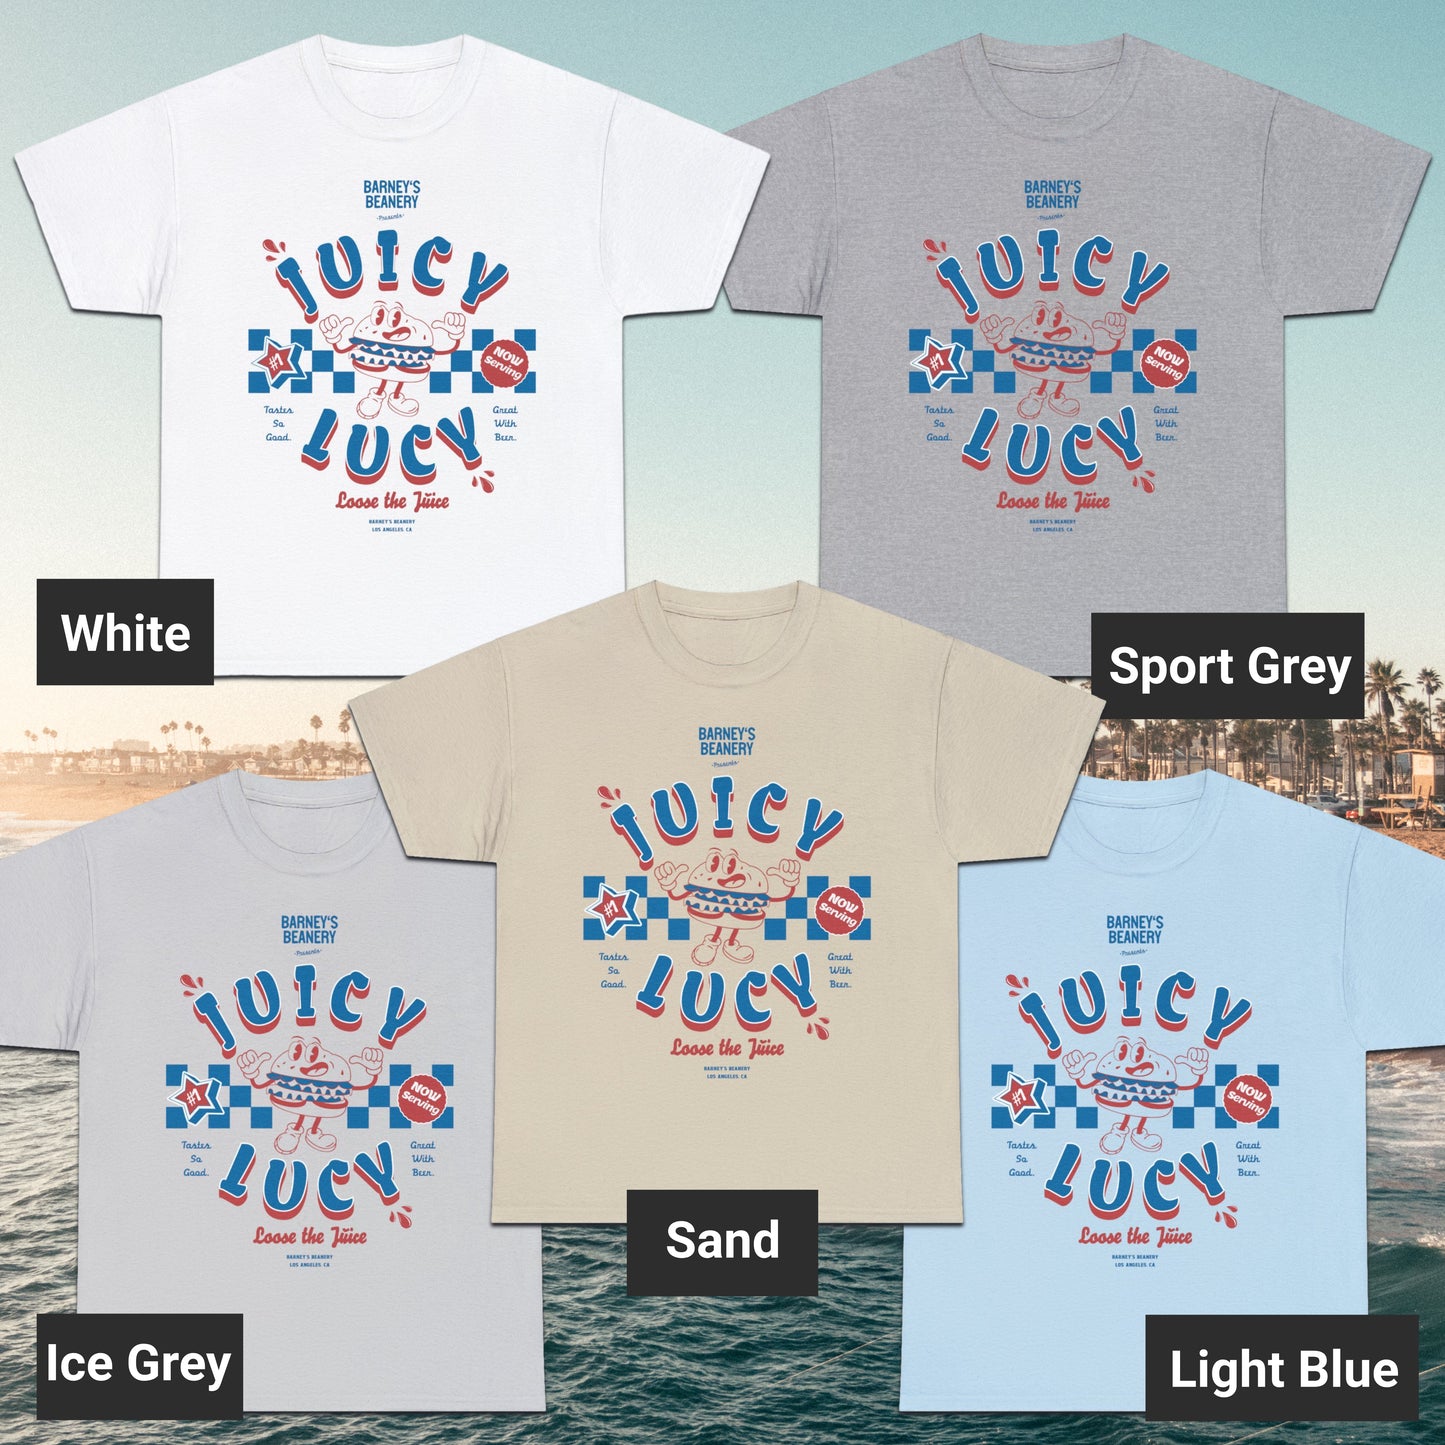 JUICY LUCY - Loose The Juice | BARNEY'S BEANERY - Women's Retro Graphic Tee | White, Sport Grey, Ice grey, Sand, Light Blue Gildan 5000 T-Shirts - Big Red & Blue Graphic On Front Flat Lay View